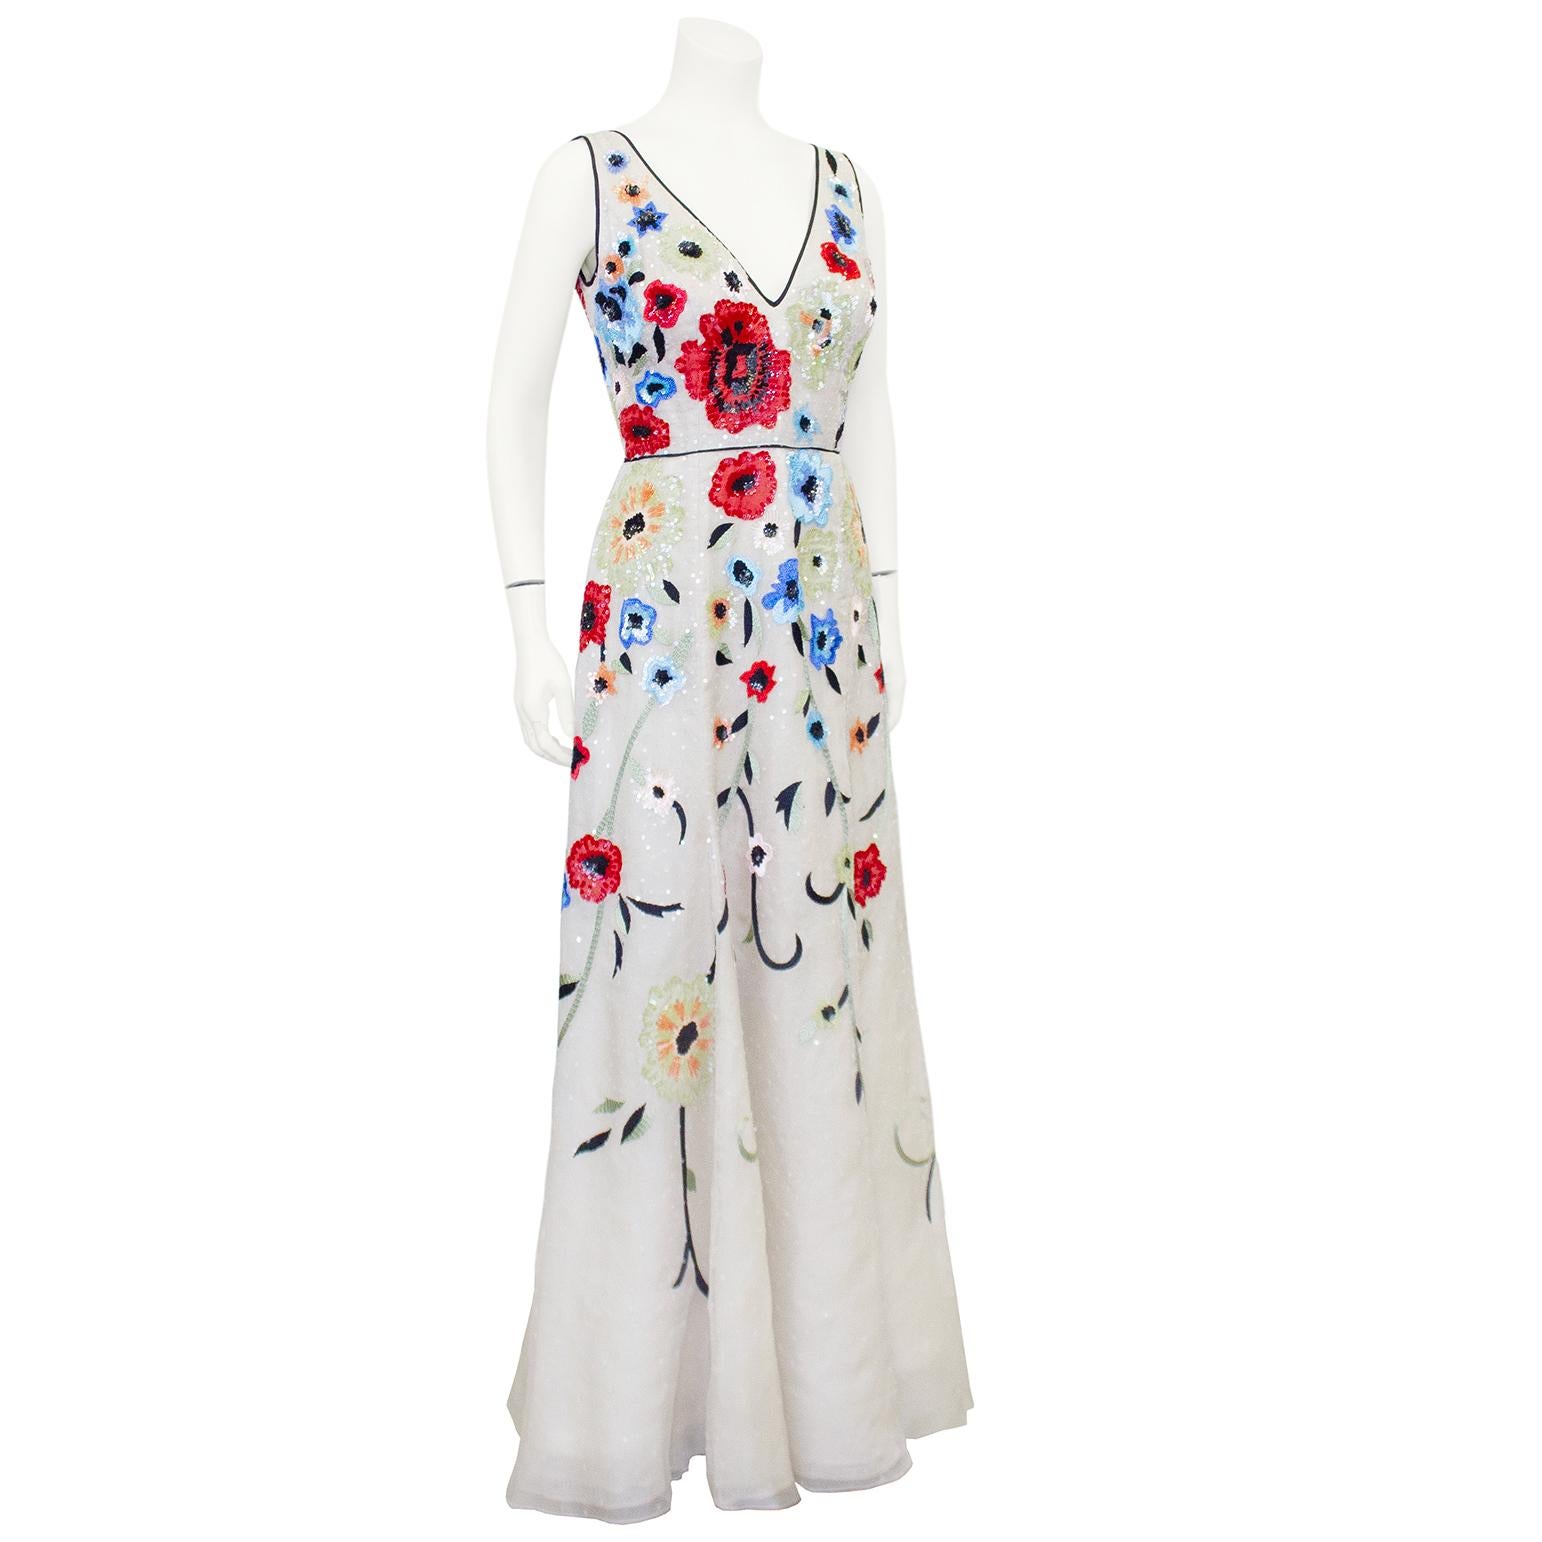 Gorgeous Dennis Basso v neck floral beaded gown. Based out of NYC, Dennis Basso is a master of evening wear. The details on this beaded gown are immaculate. Off white organza layered gown with blue and red floral beading. Trimmed in black satin at